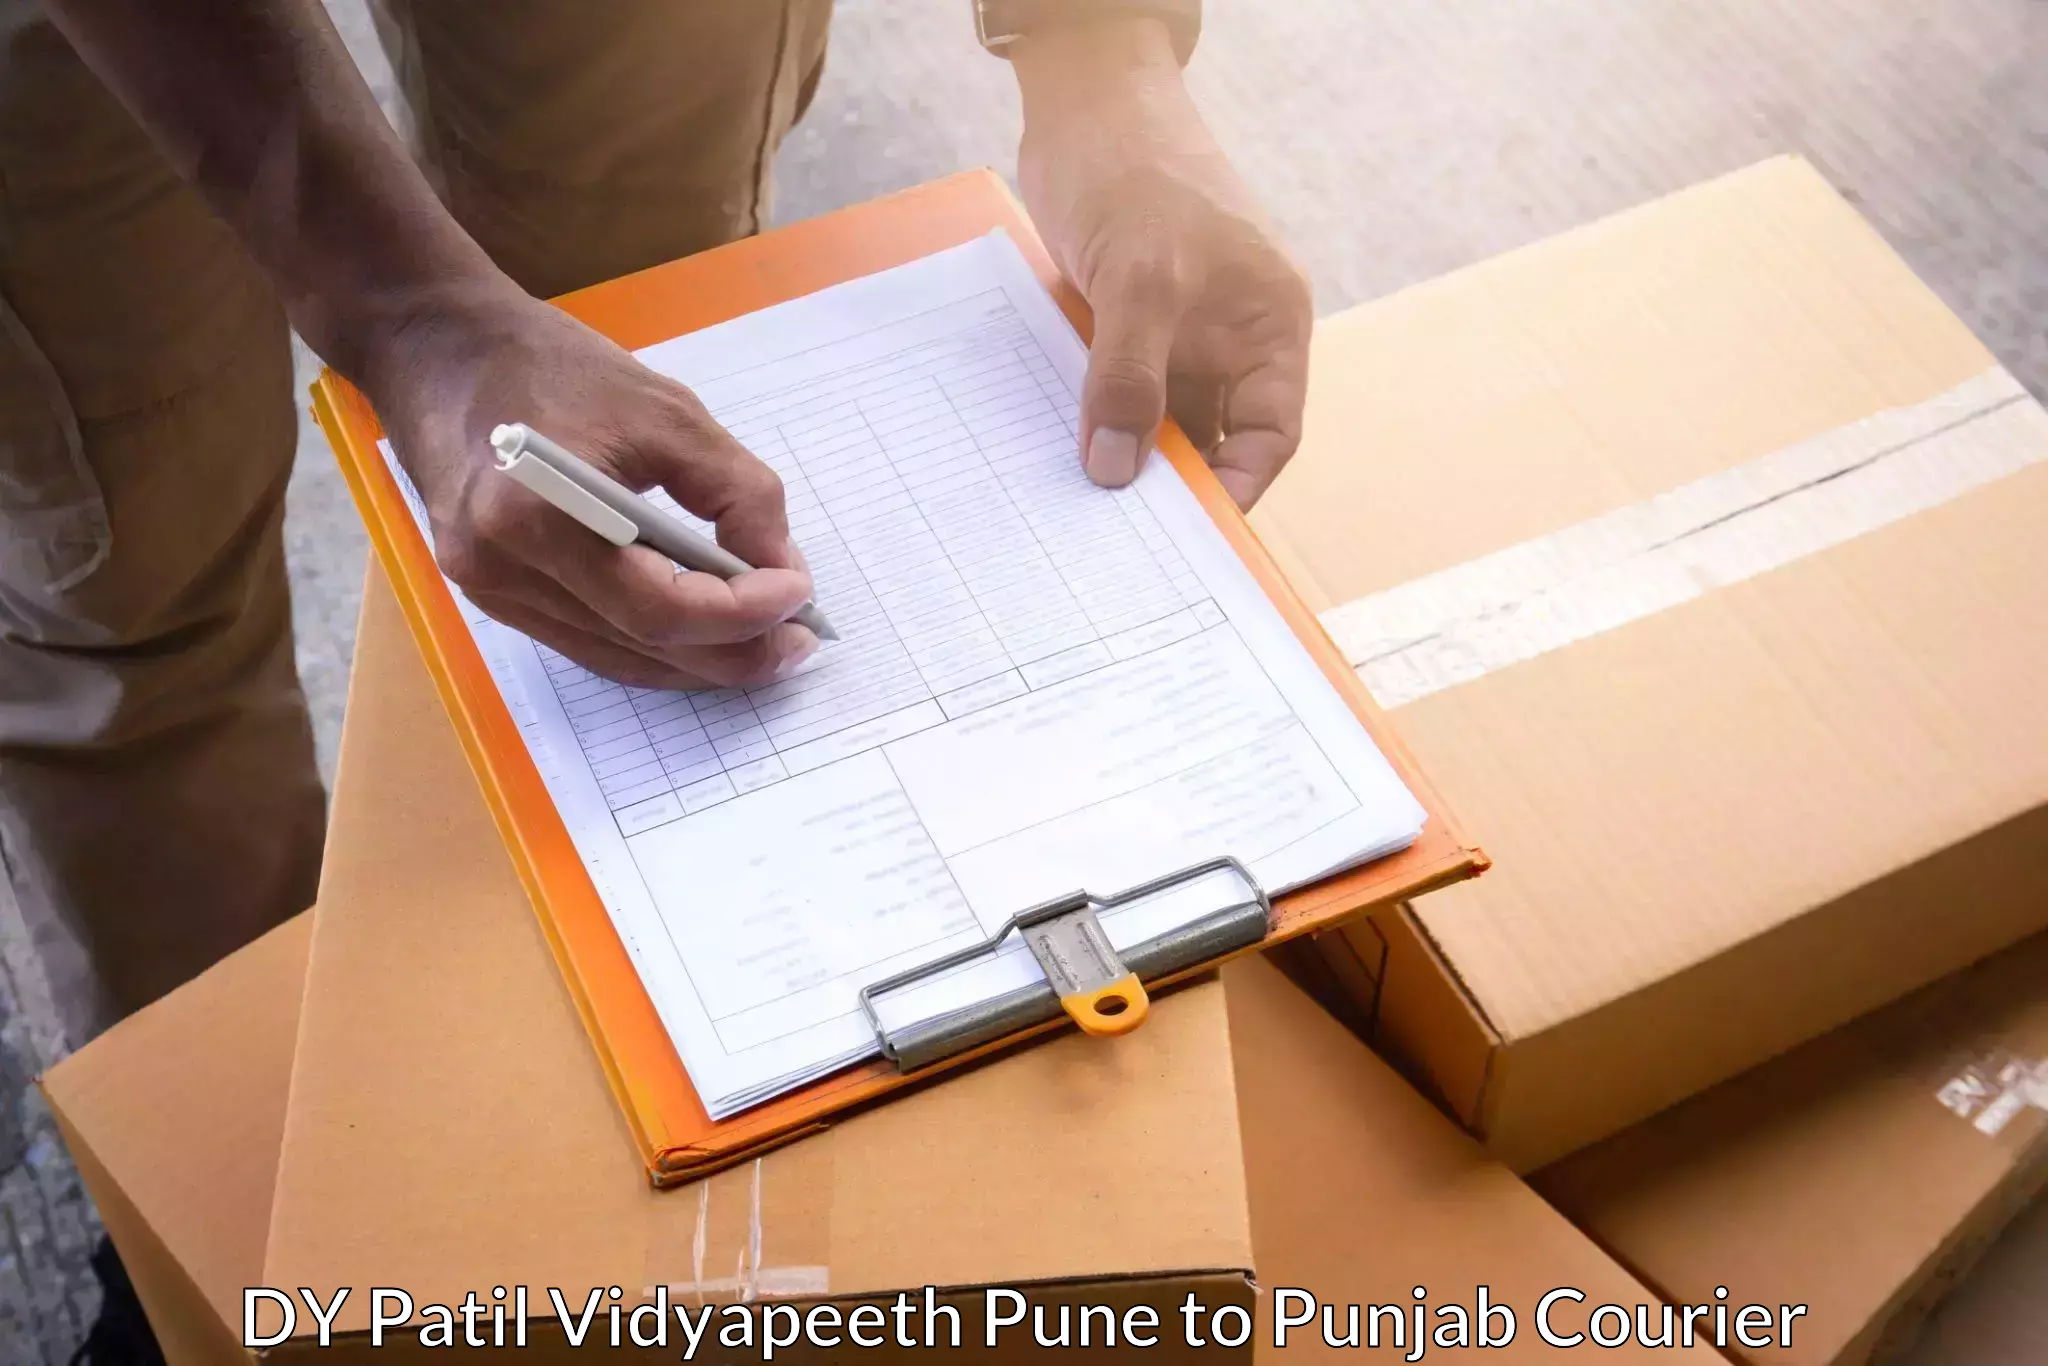 Express delivery network DY Patil Vidyapeeth Pune to Dhilwan